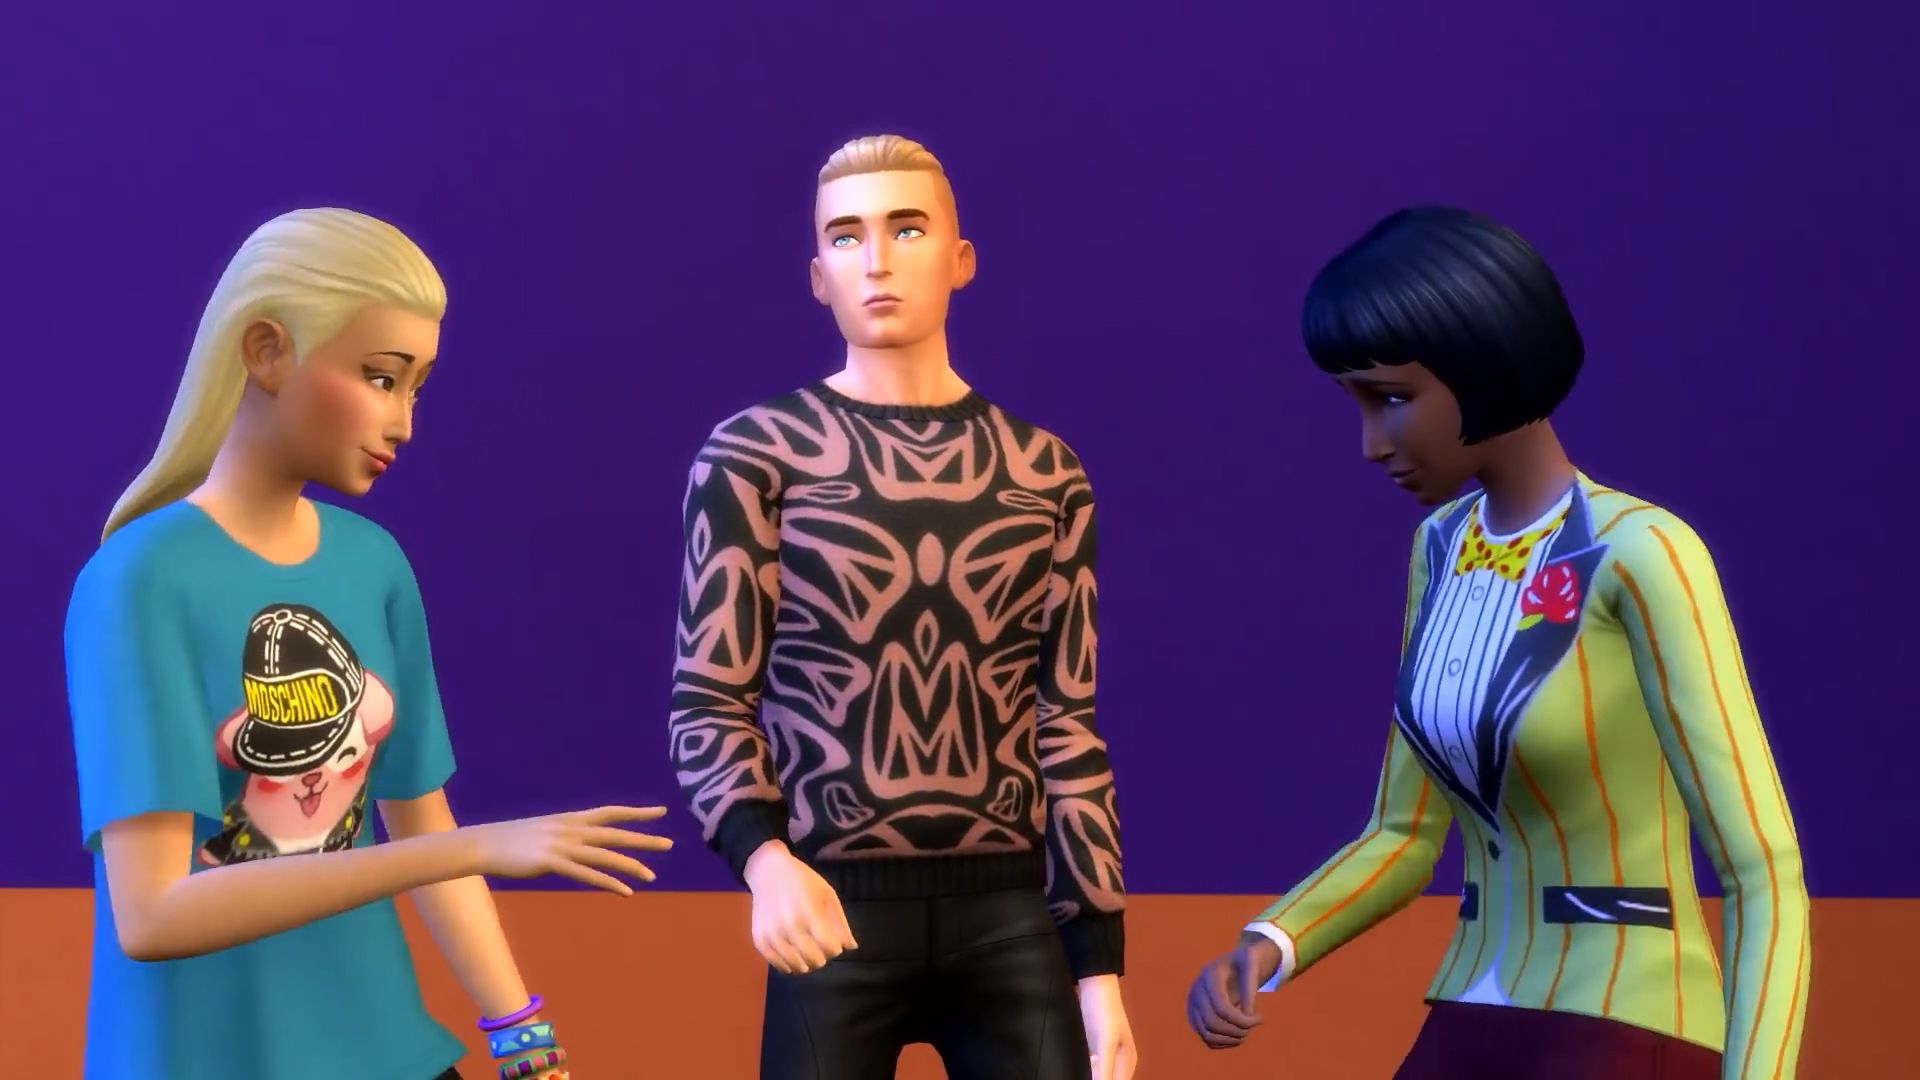 10 Things We Can Expect From The Sims 4 Moschino Stuff Pack